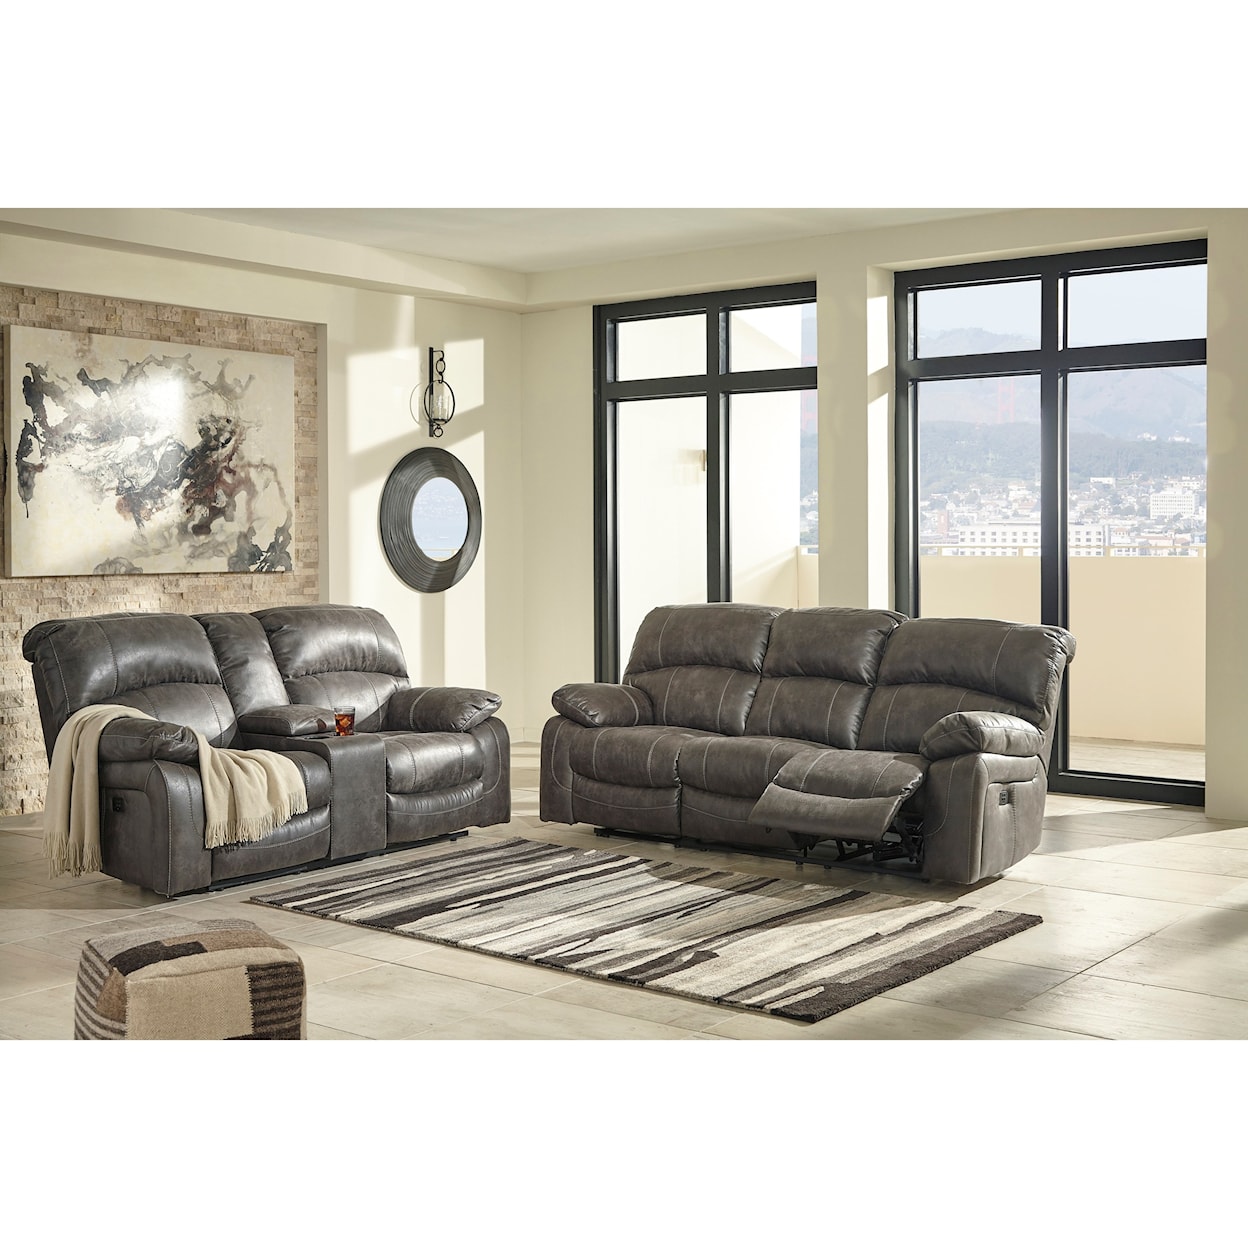 Signature Design by Ashley Furniture Dunwell Reclining Living Room Group